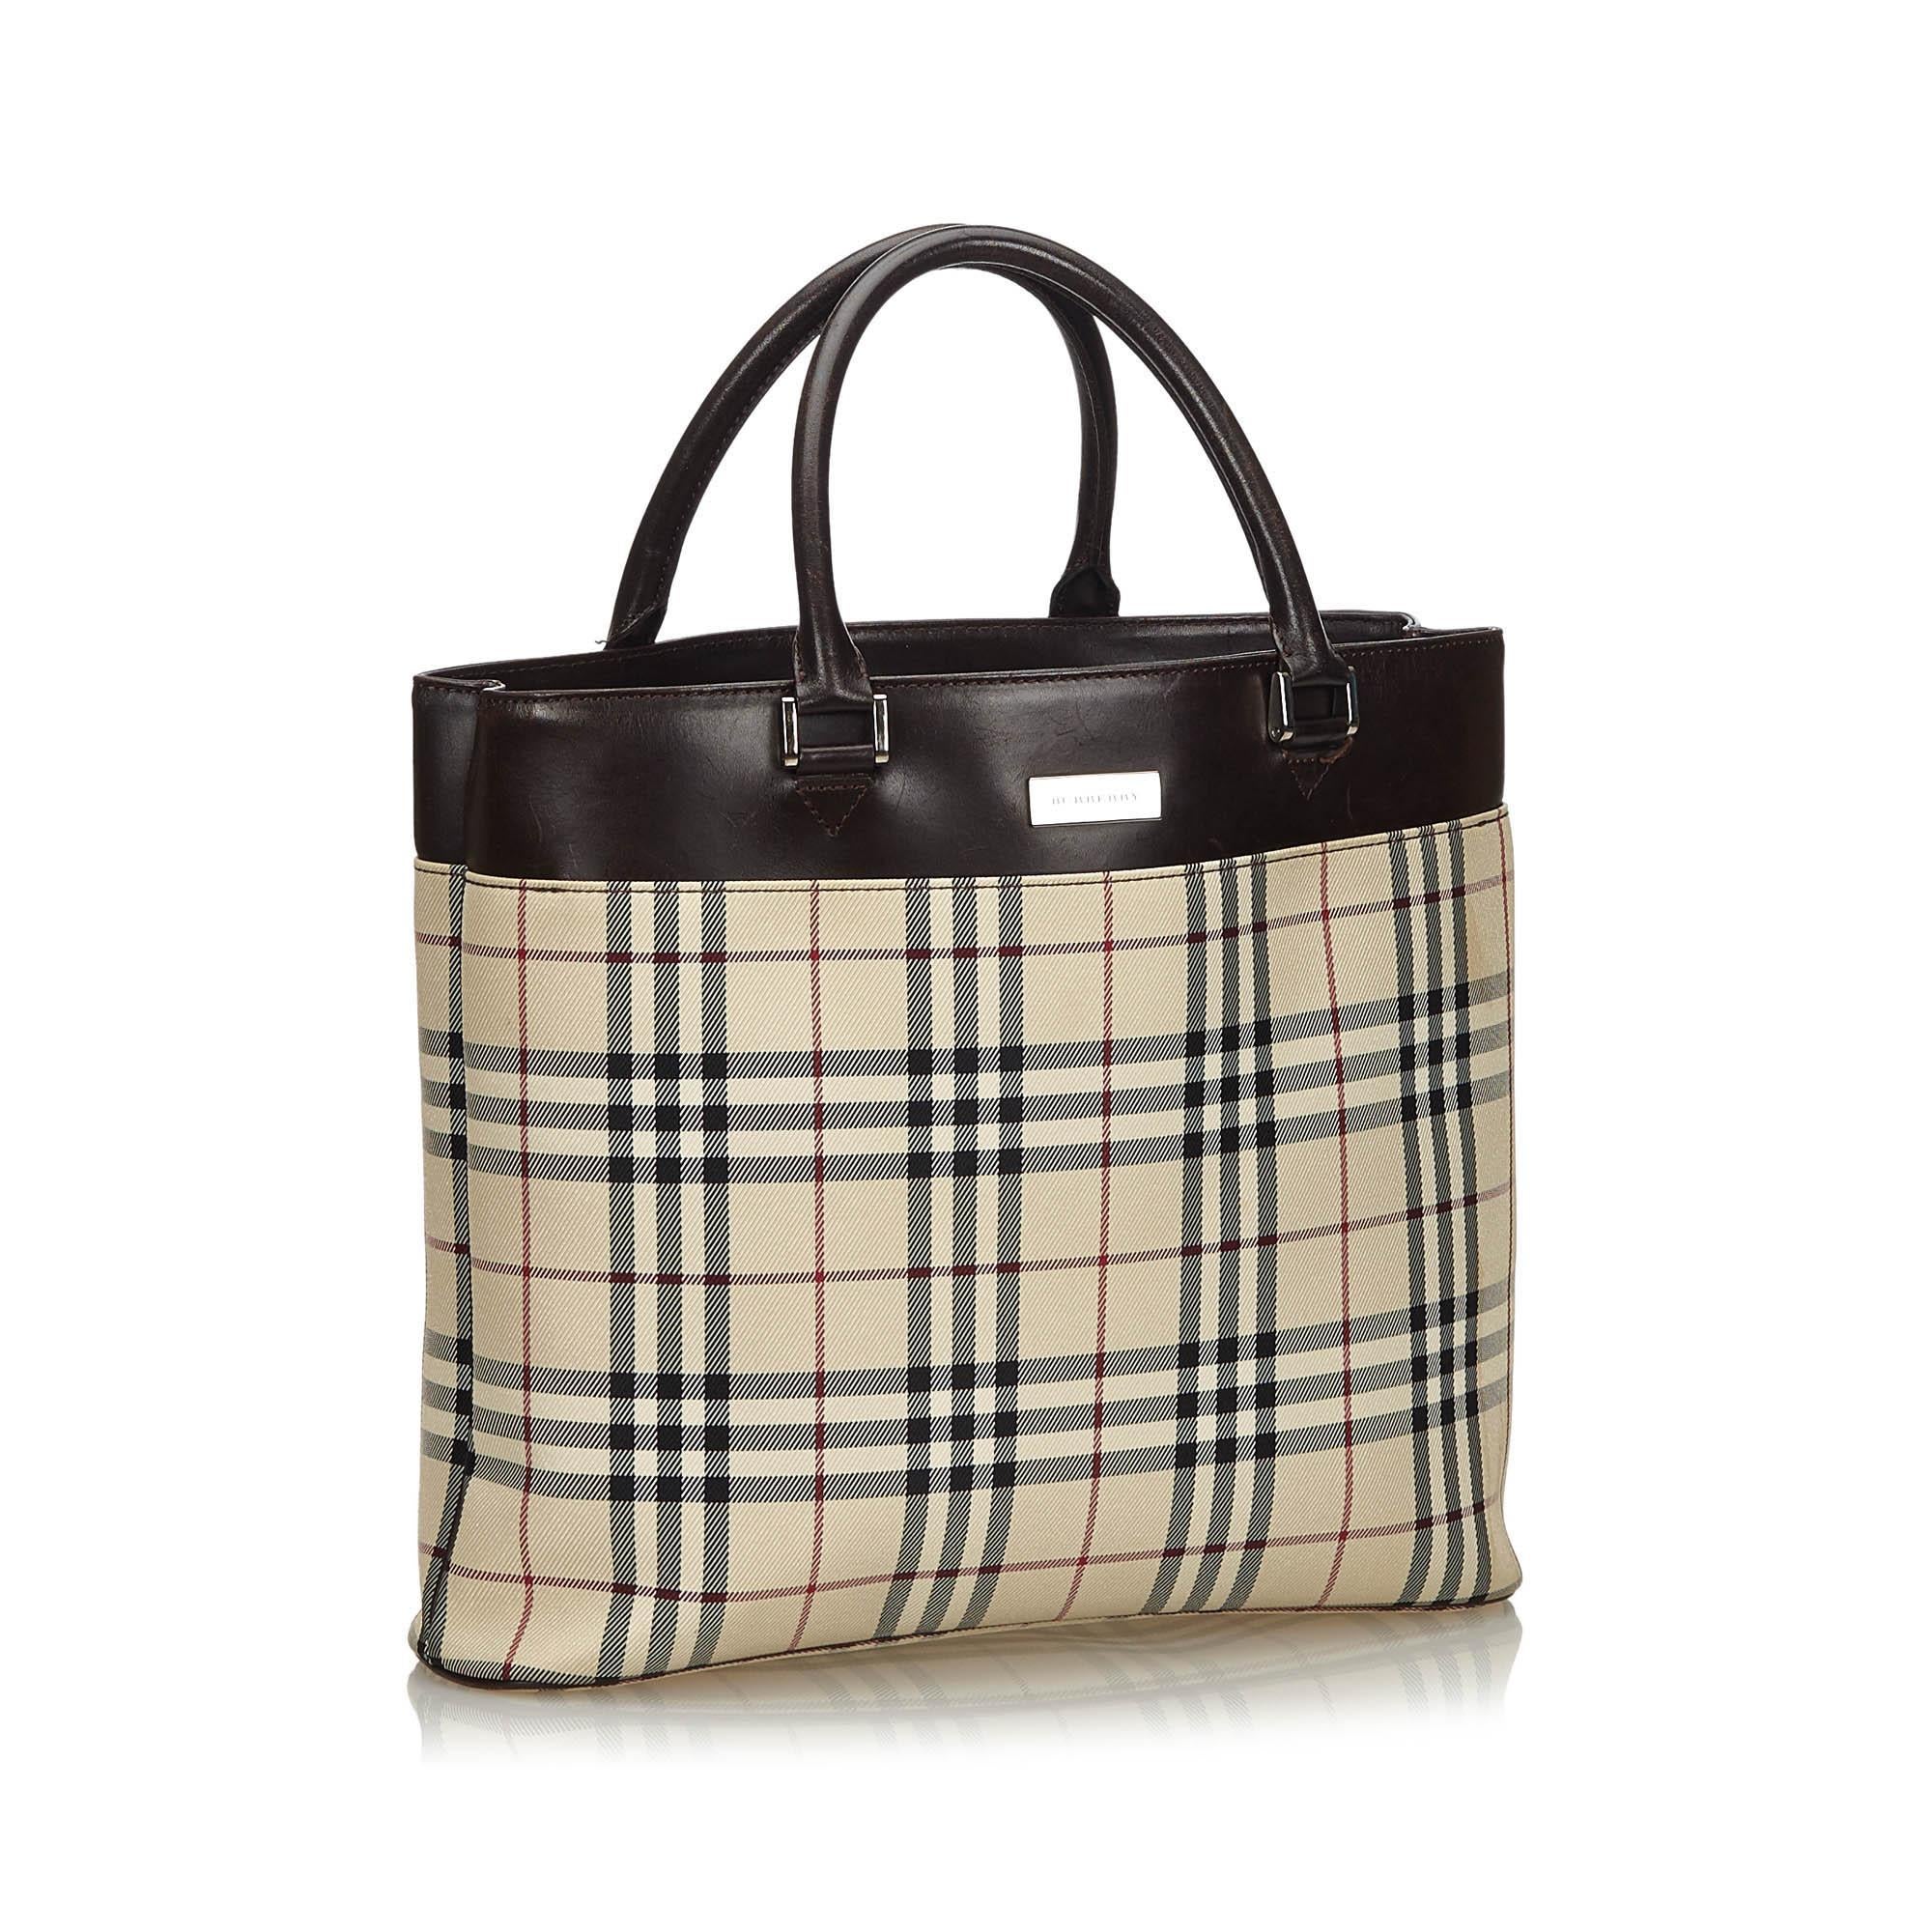 This tote features a plaid jacquard body with a top leather panel, an exterior slip pocket, rolled leather handles, a top magnetic closure, and interior zip and slip pockets. It carries as B+ condition rating.

Inclusions: 
Box

Dimensions:
Length: